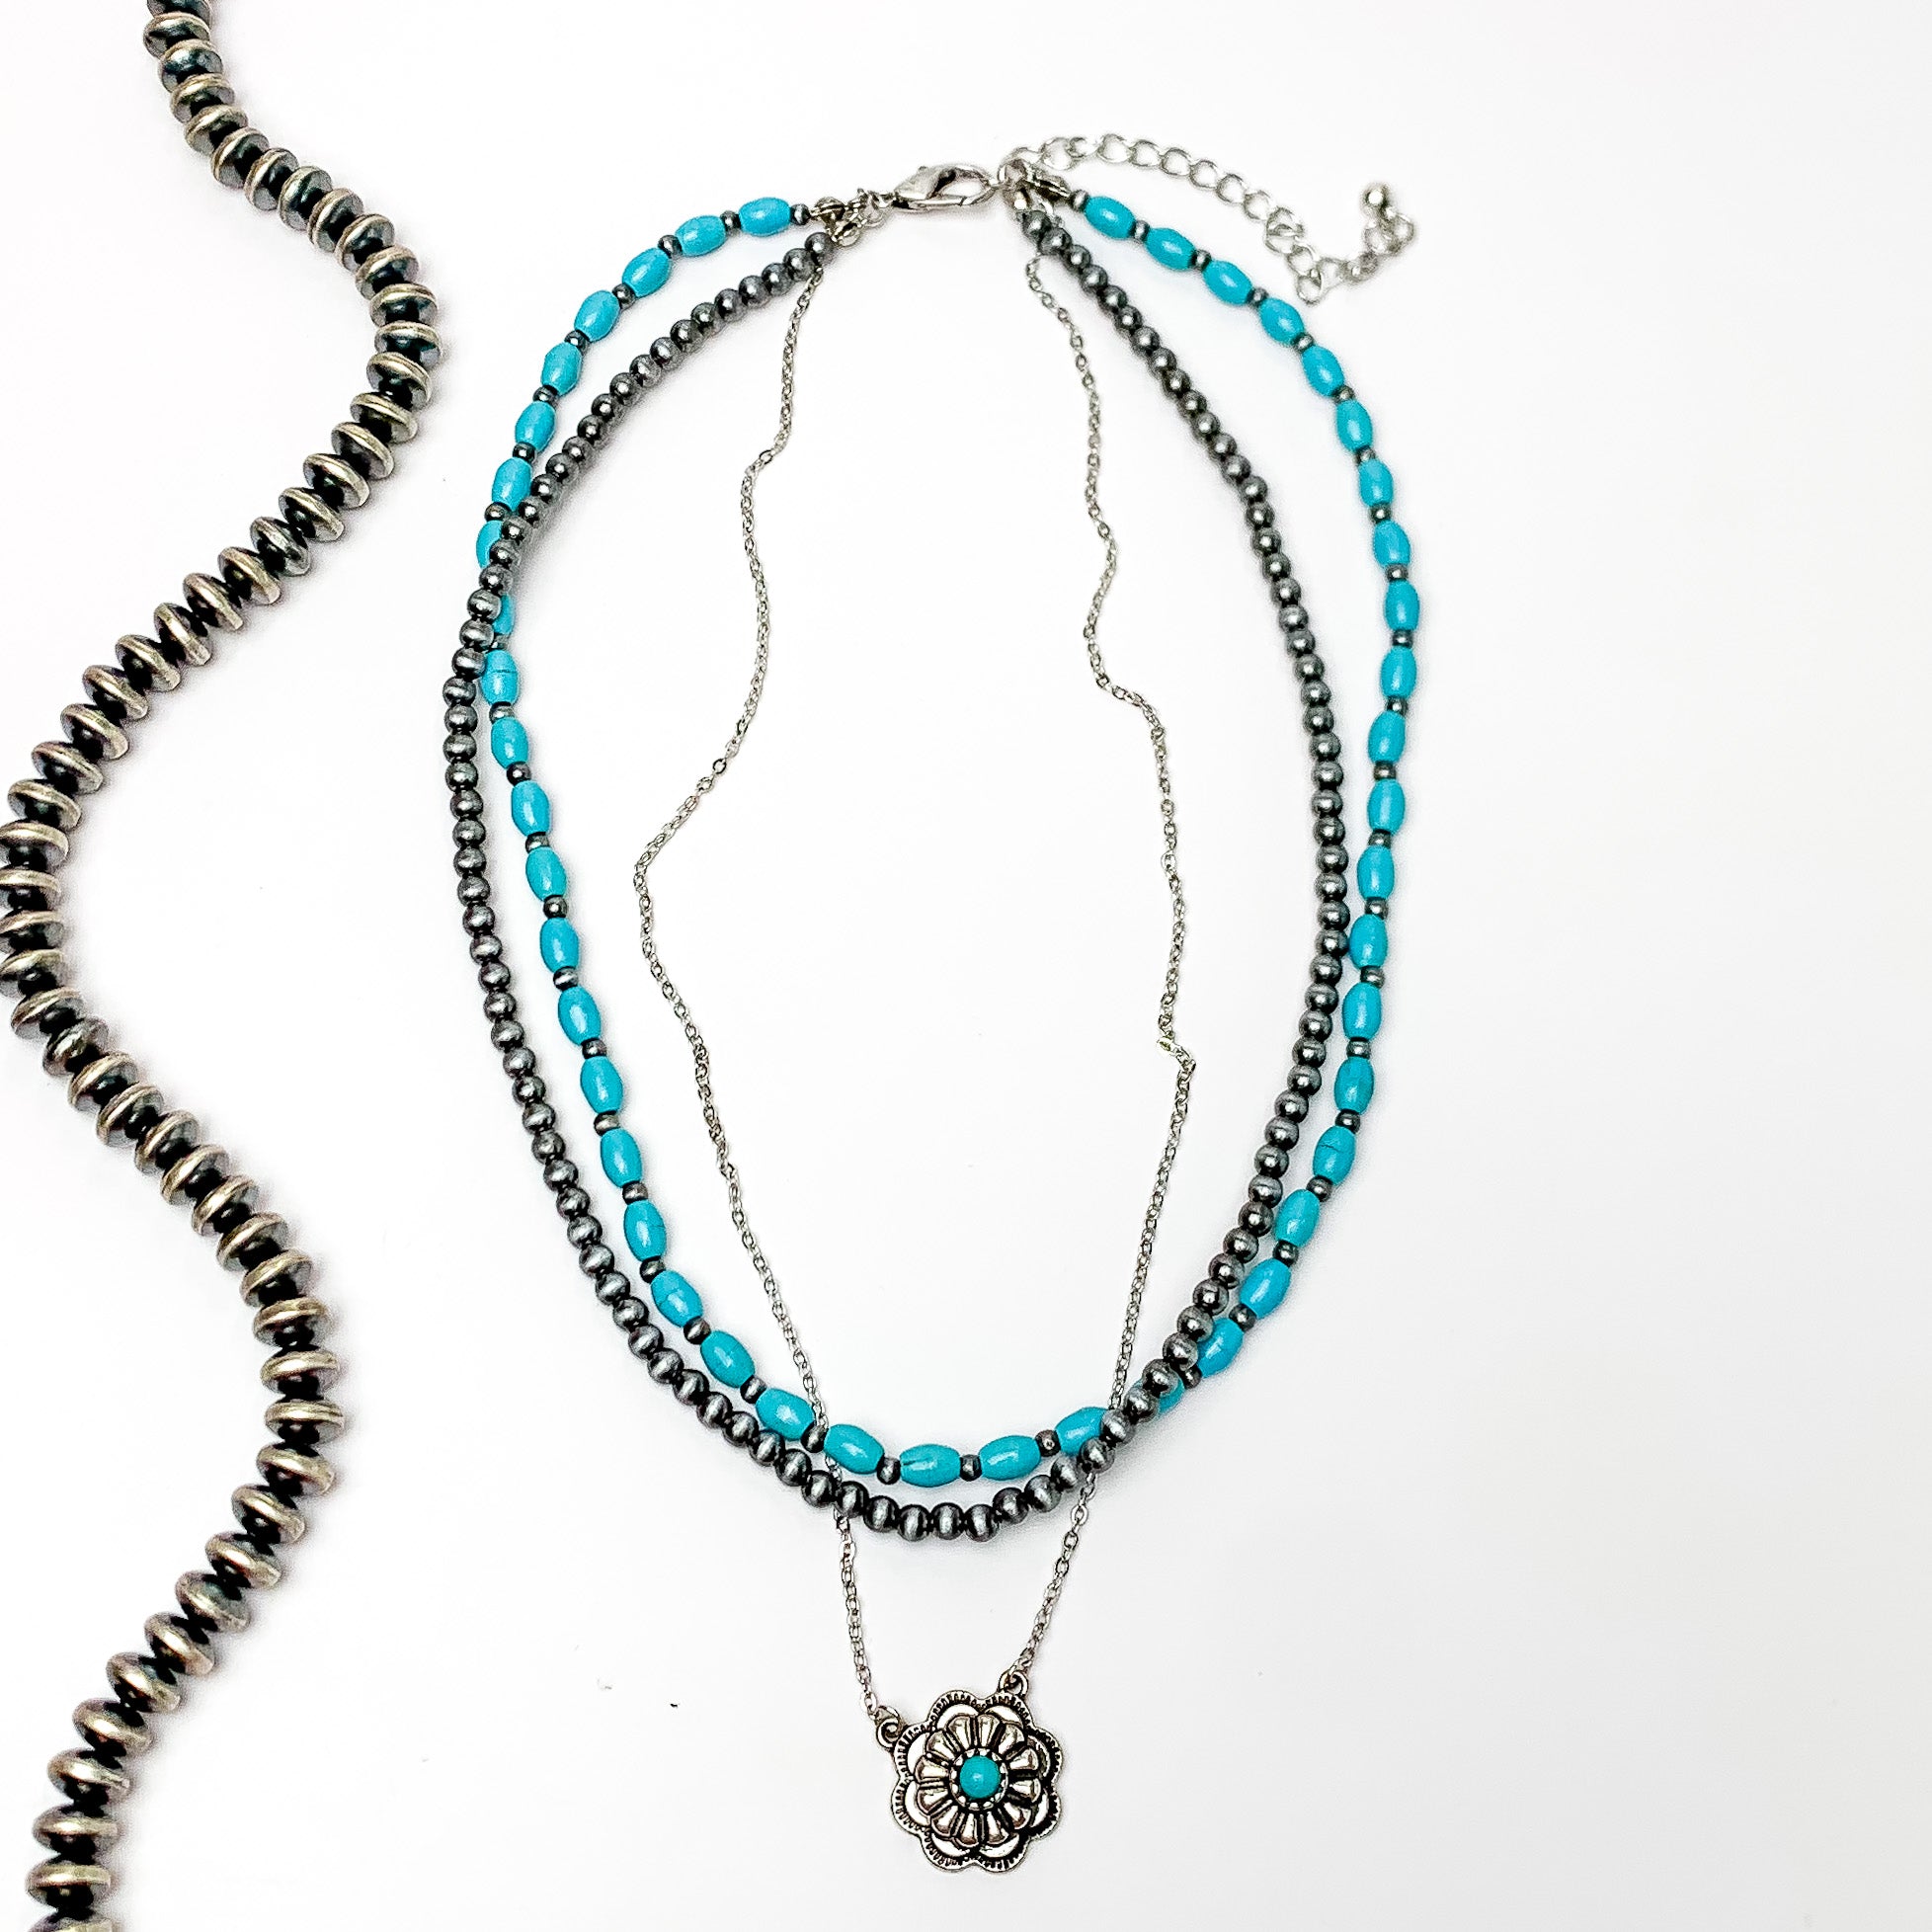 Multi strand necklace with faux navajo and turquoise beads and a dangling silver flower pendent with a turquoise stone in the middle. Pictured on a white background with a strand of silver beads to the left of it.